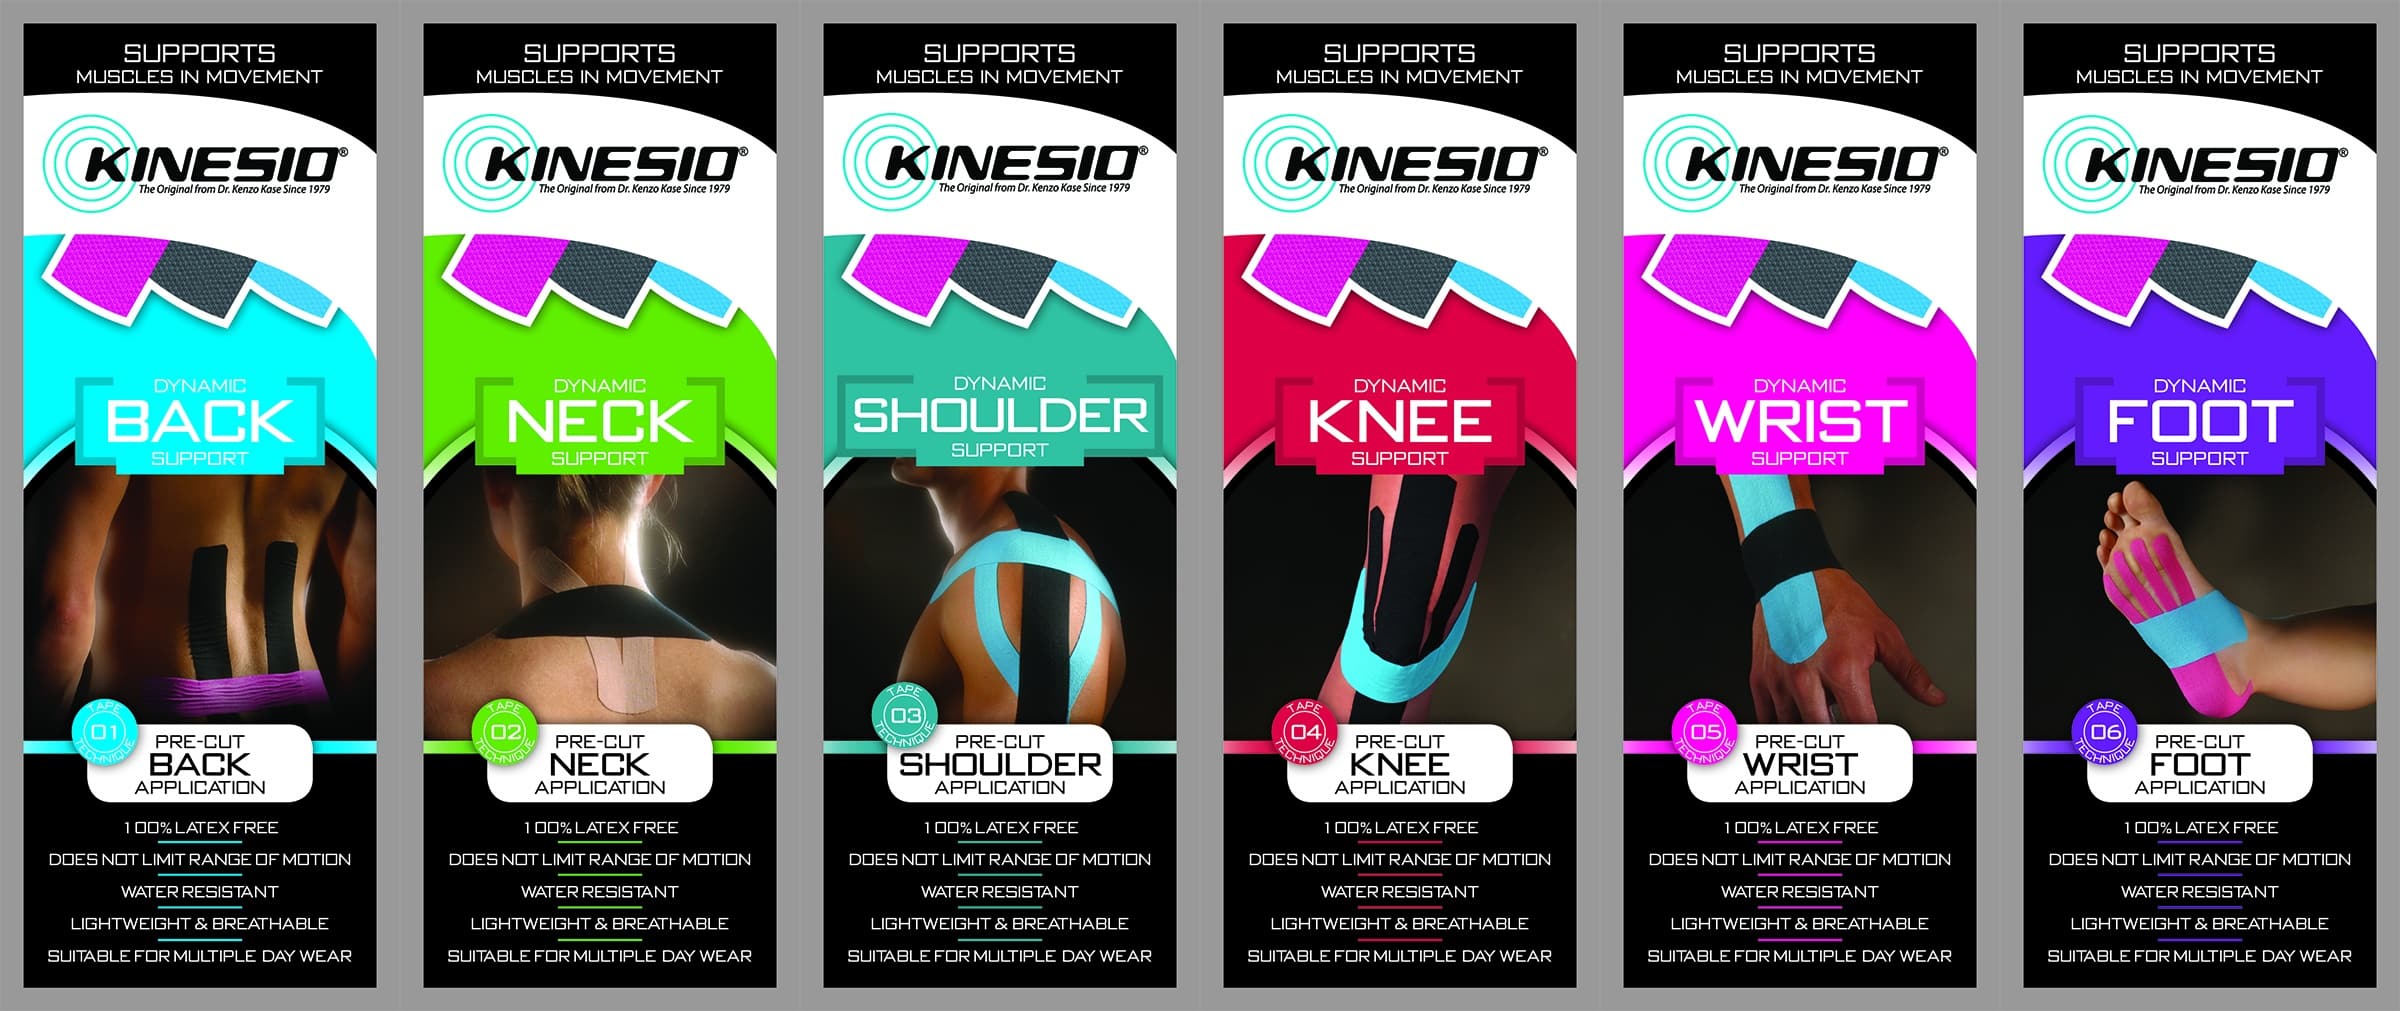 KINESIO Pre Cut Kinesiology Tape FREE POST PACK OF 2 BACK injuries & support 